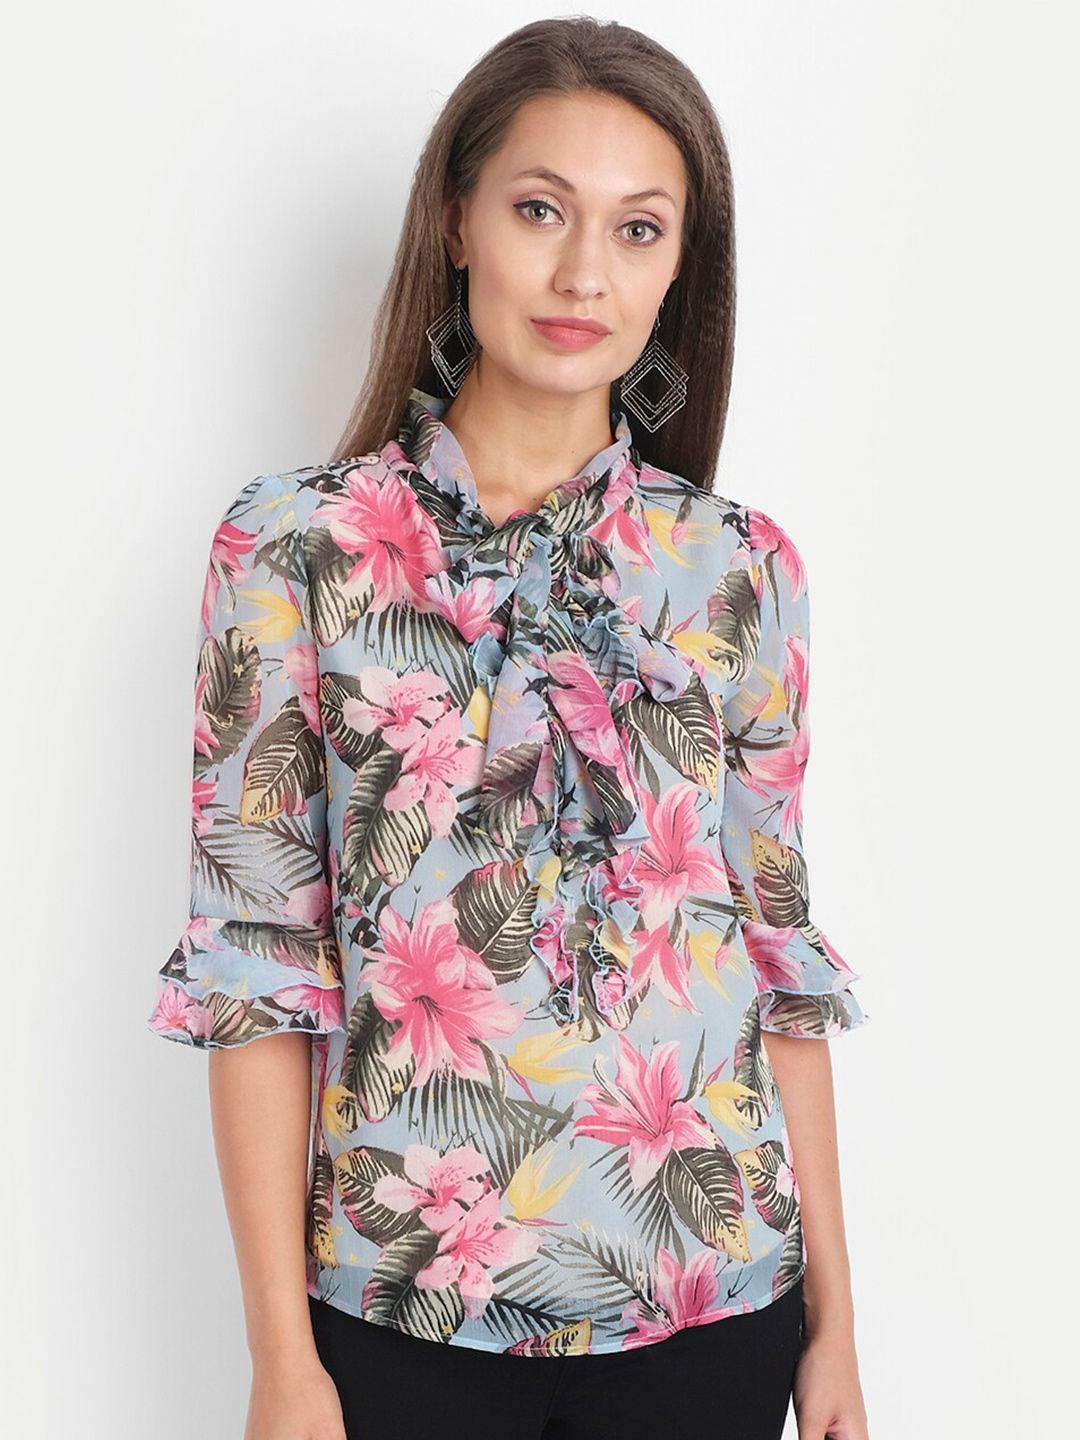 ly2-multicoloured-floral-chiffon-regular-top